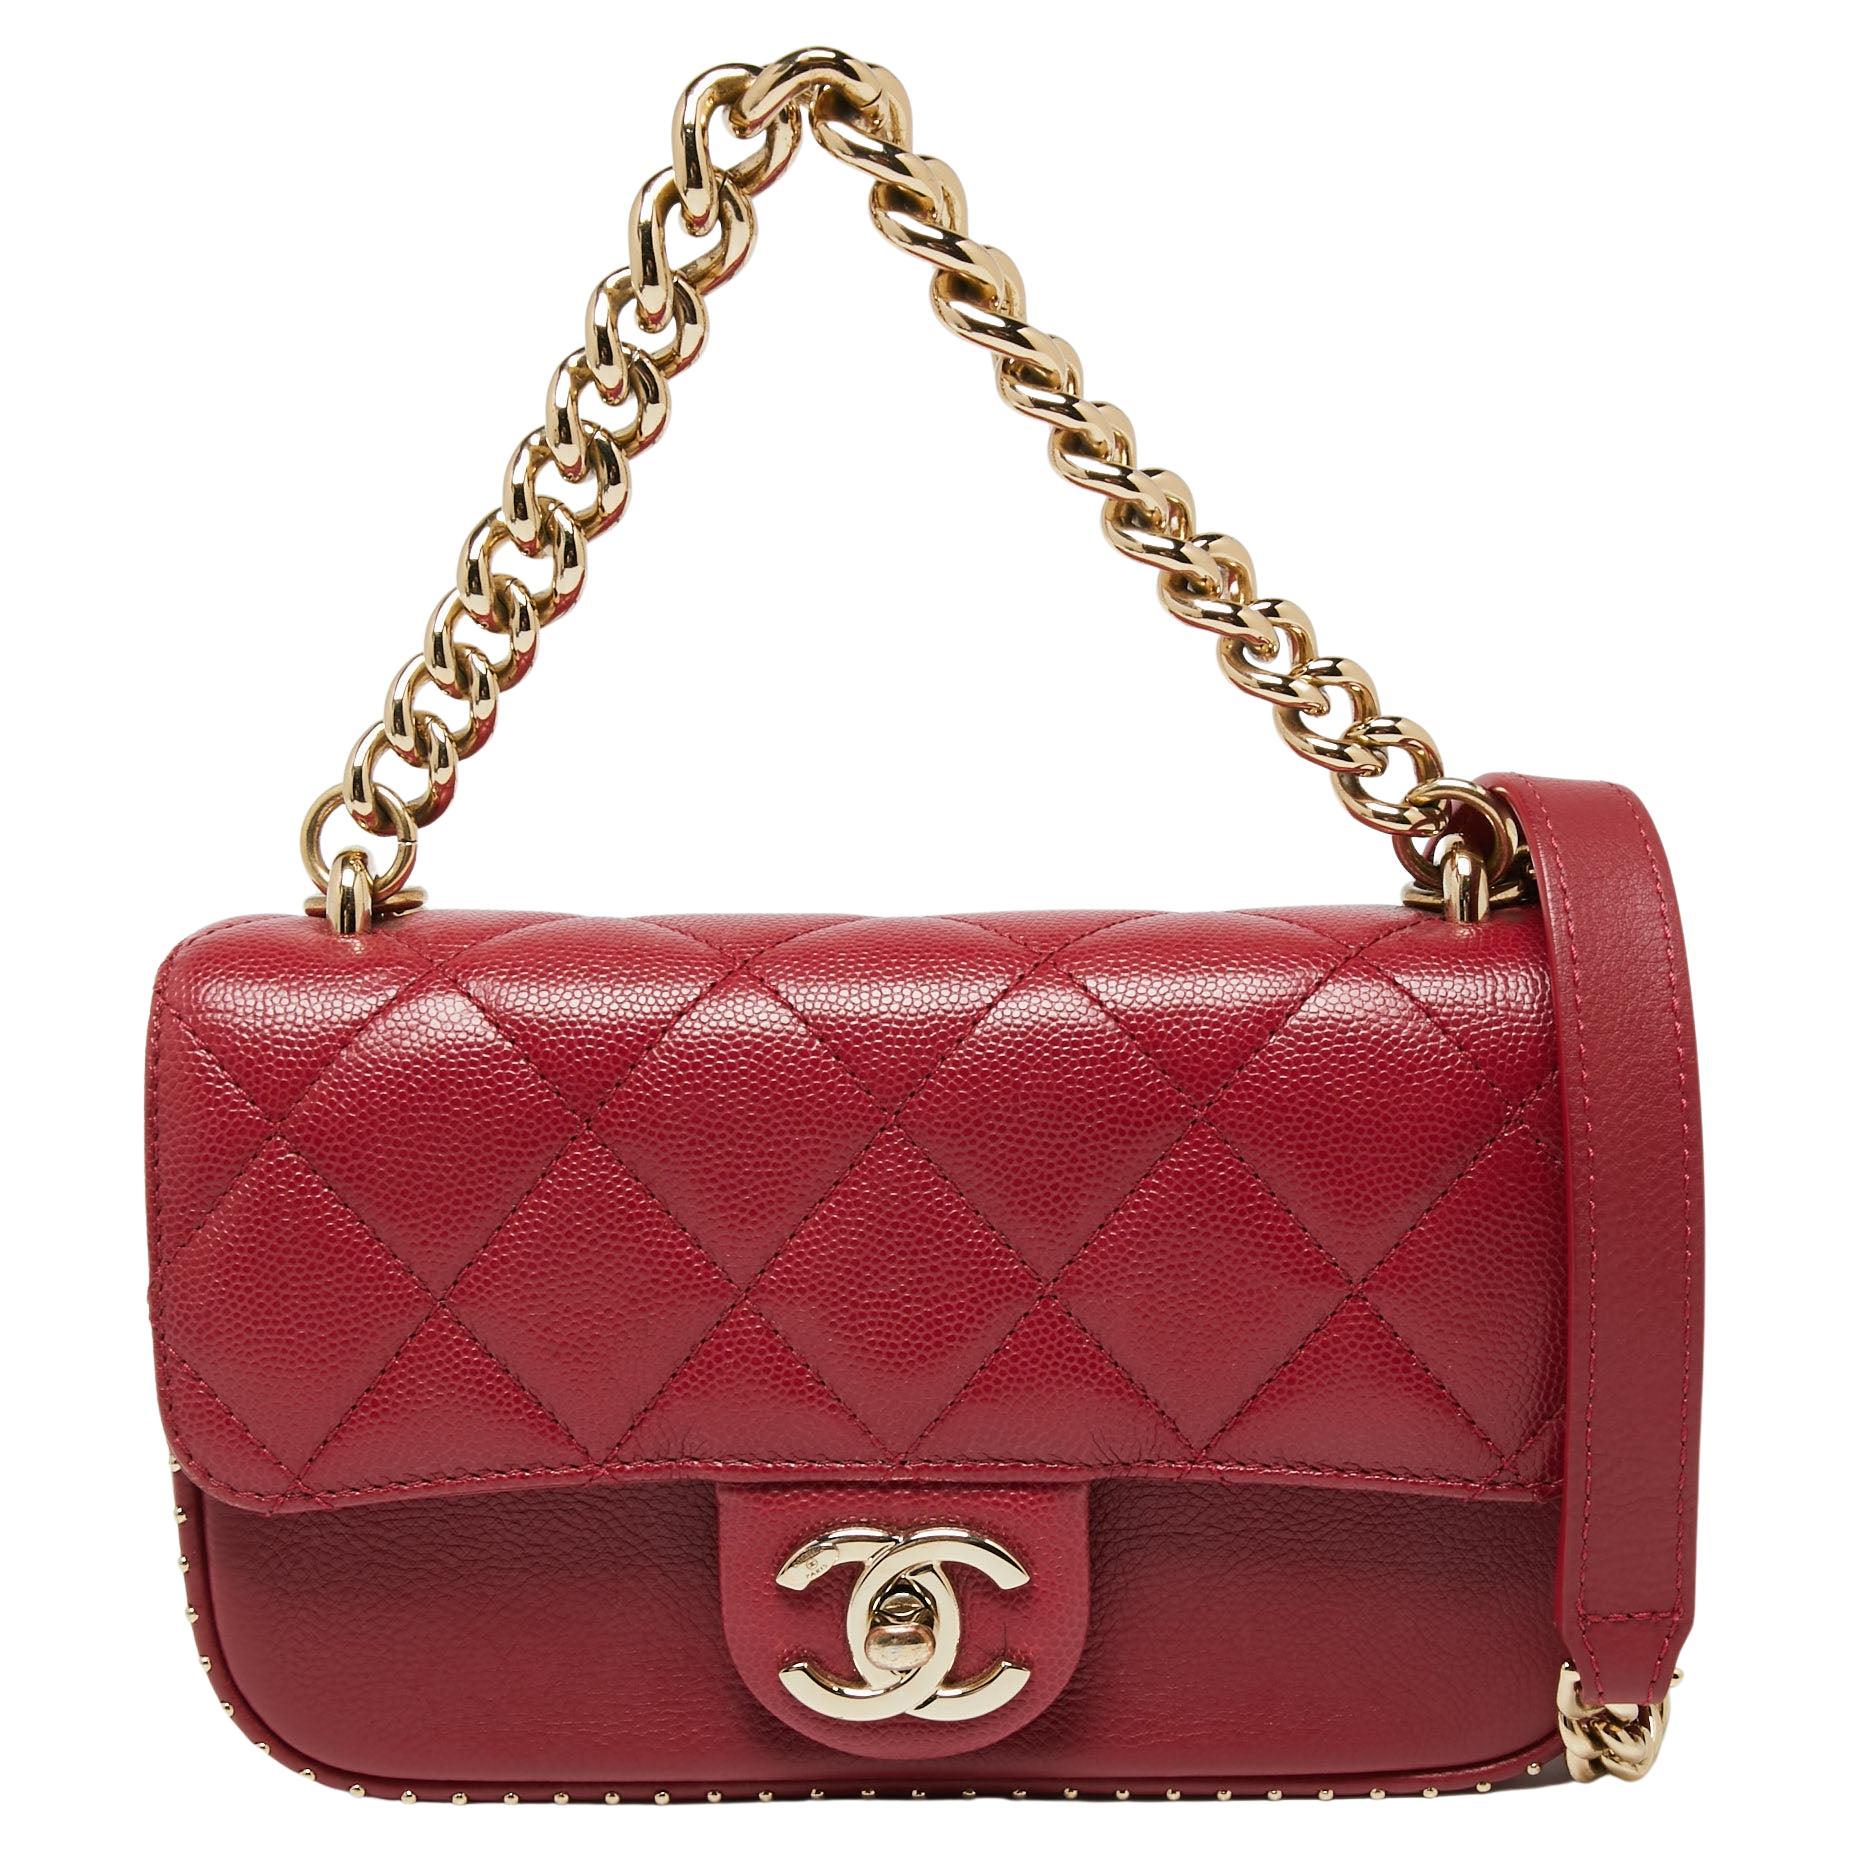 Chanel Cherry Red Caviar Quilted Leather Small Studded Flap Bag